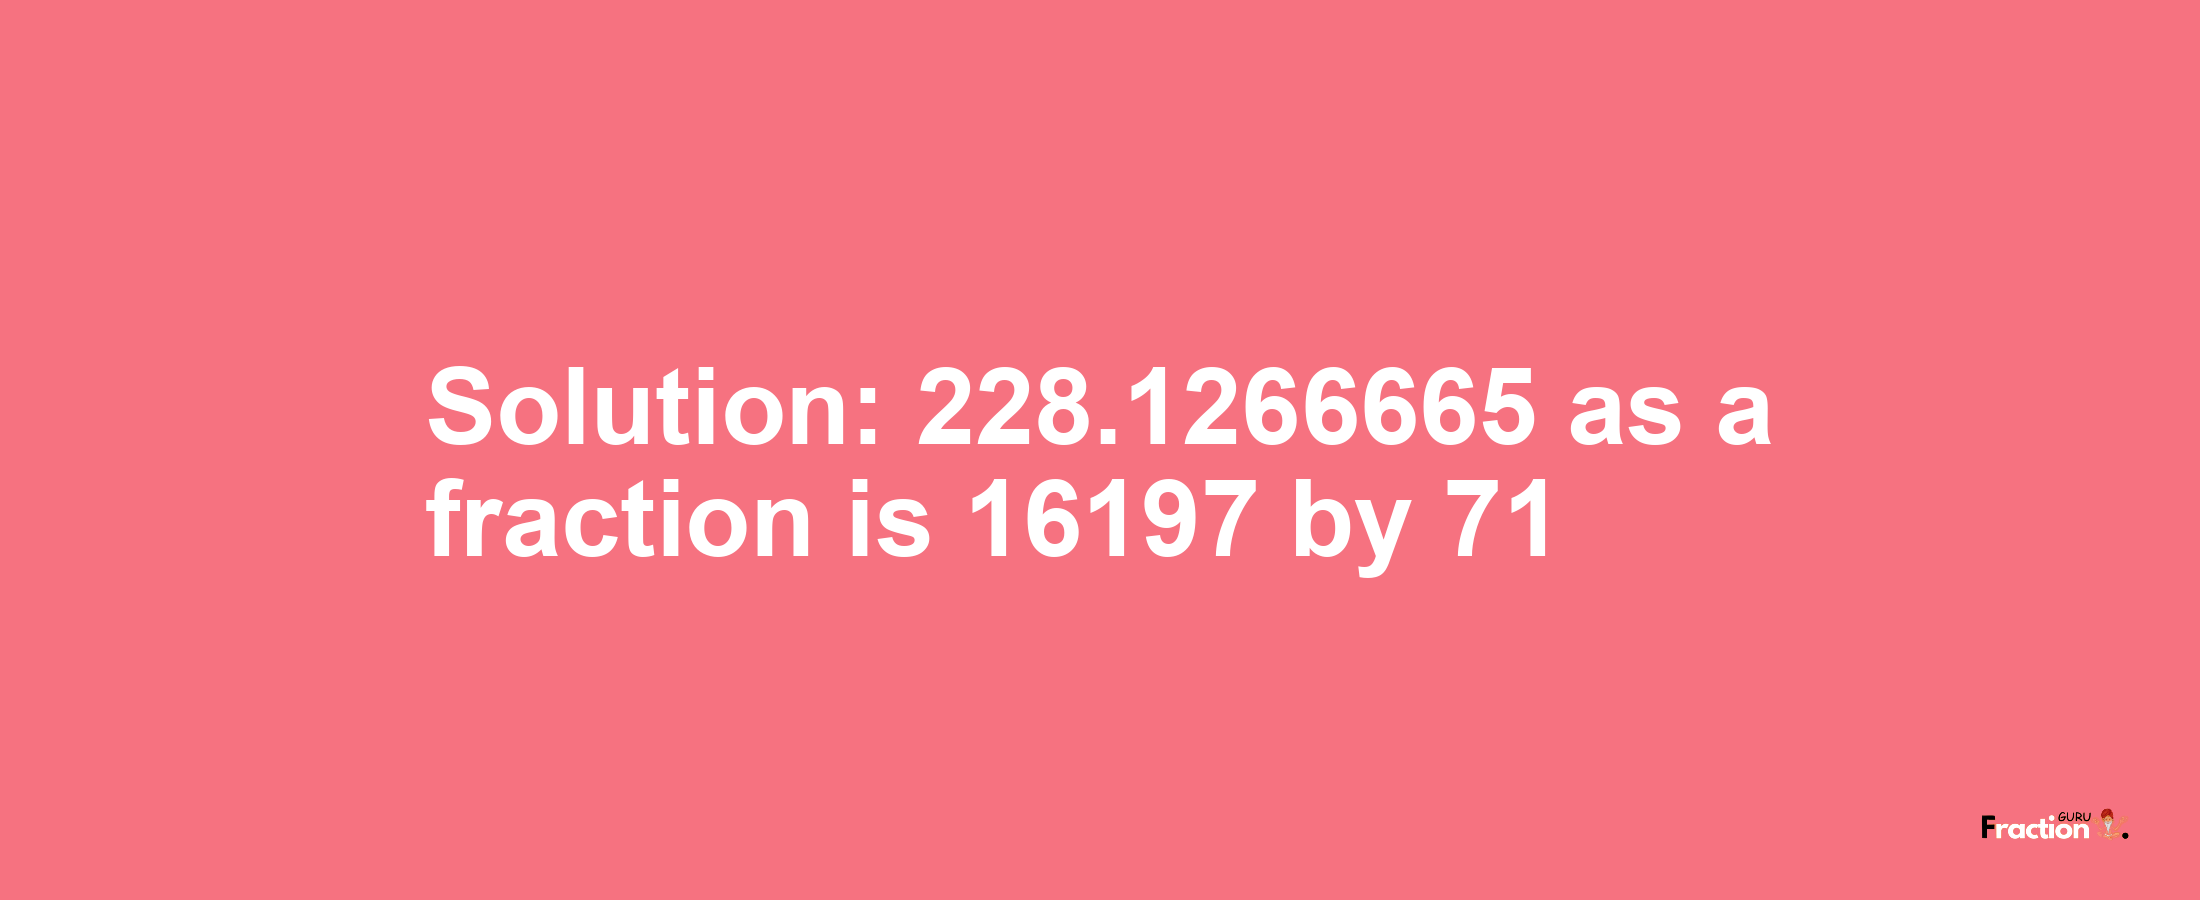 Solution:228.1266665 as a fraction is 16197/71